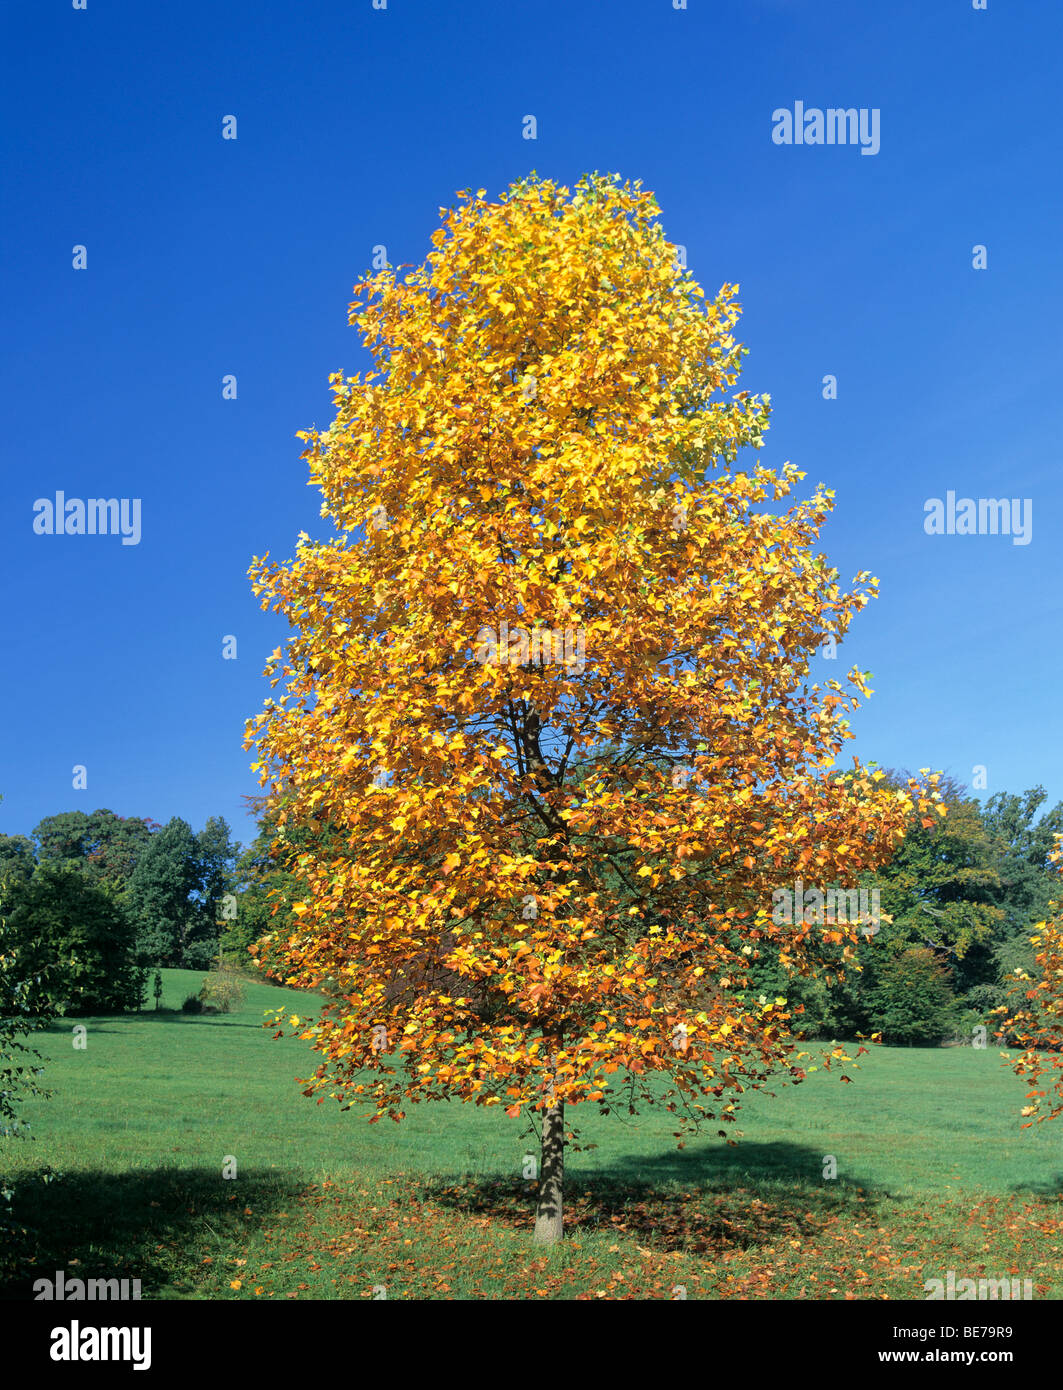 Young Maple tree (Acer) in autumn, autumnal foliage, Germany, Europe Stock Photo